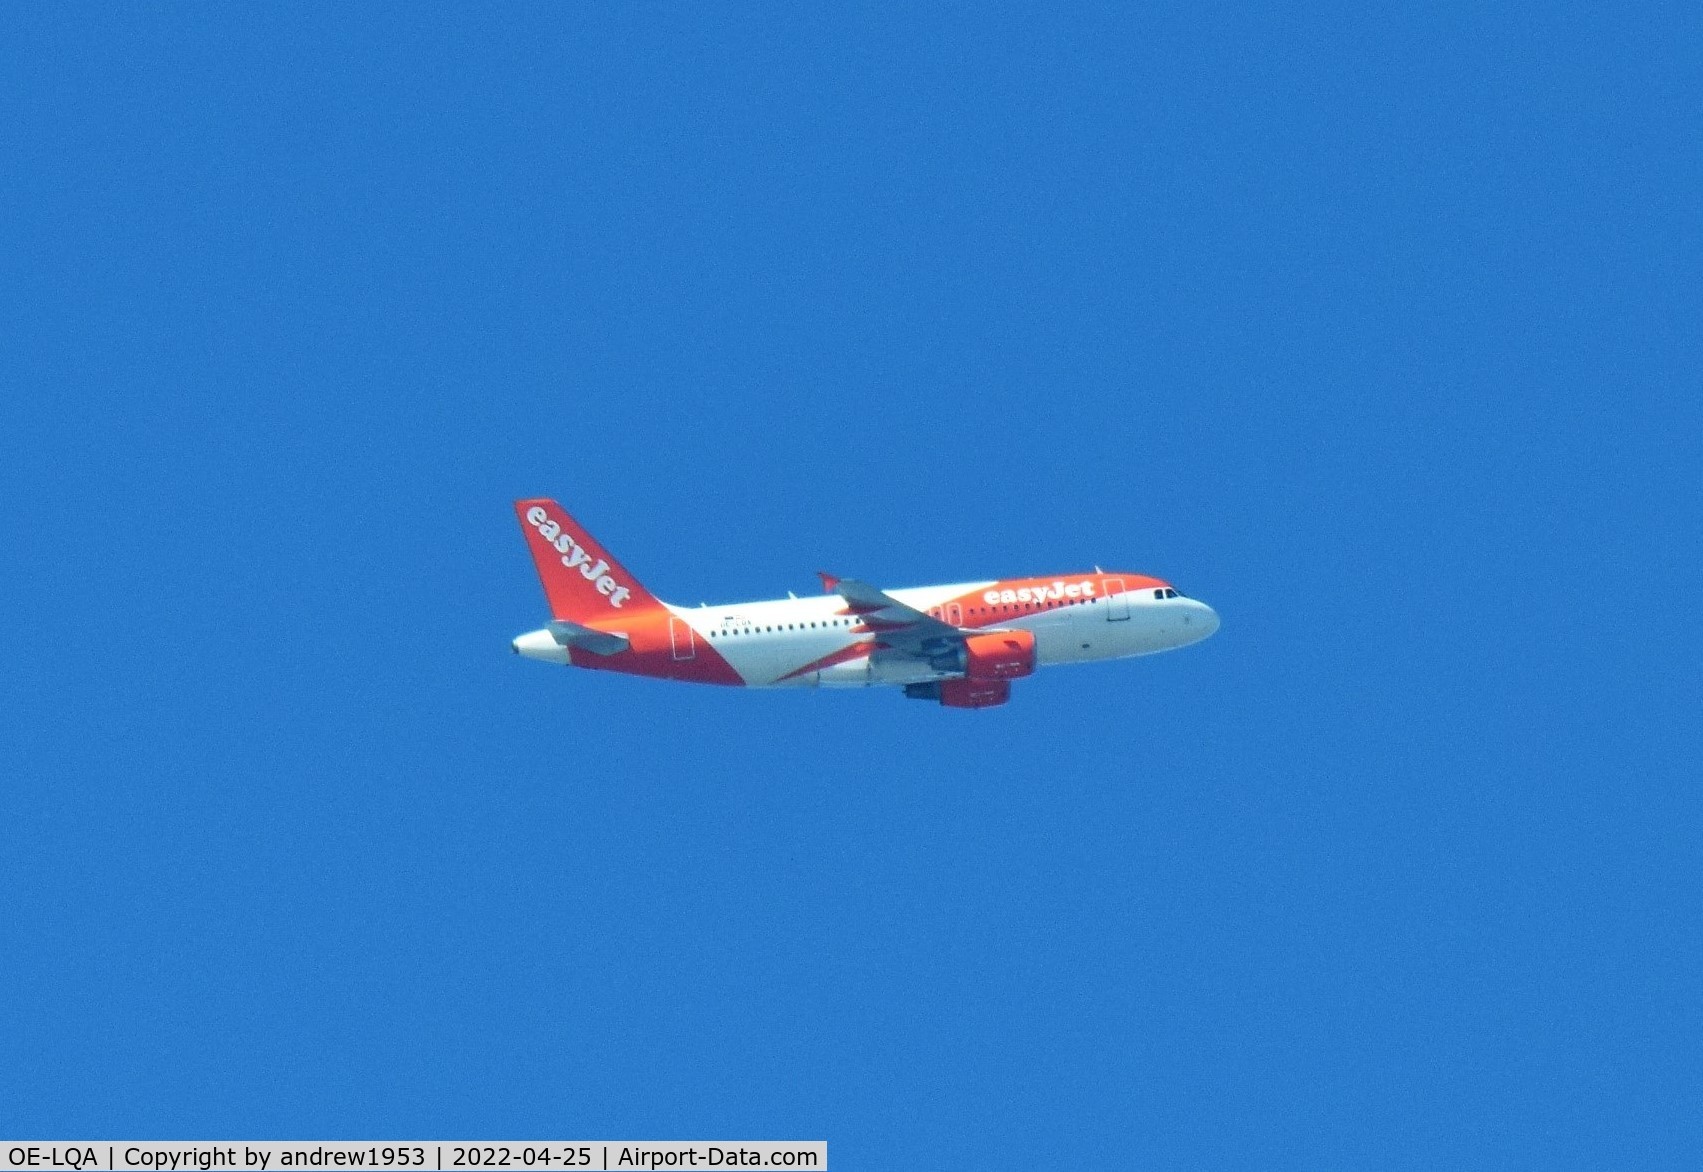 OE-LQA, 2009 Airbus A319-111 C/N 3799, OE-LQA over the Bristol Channel.